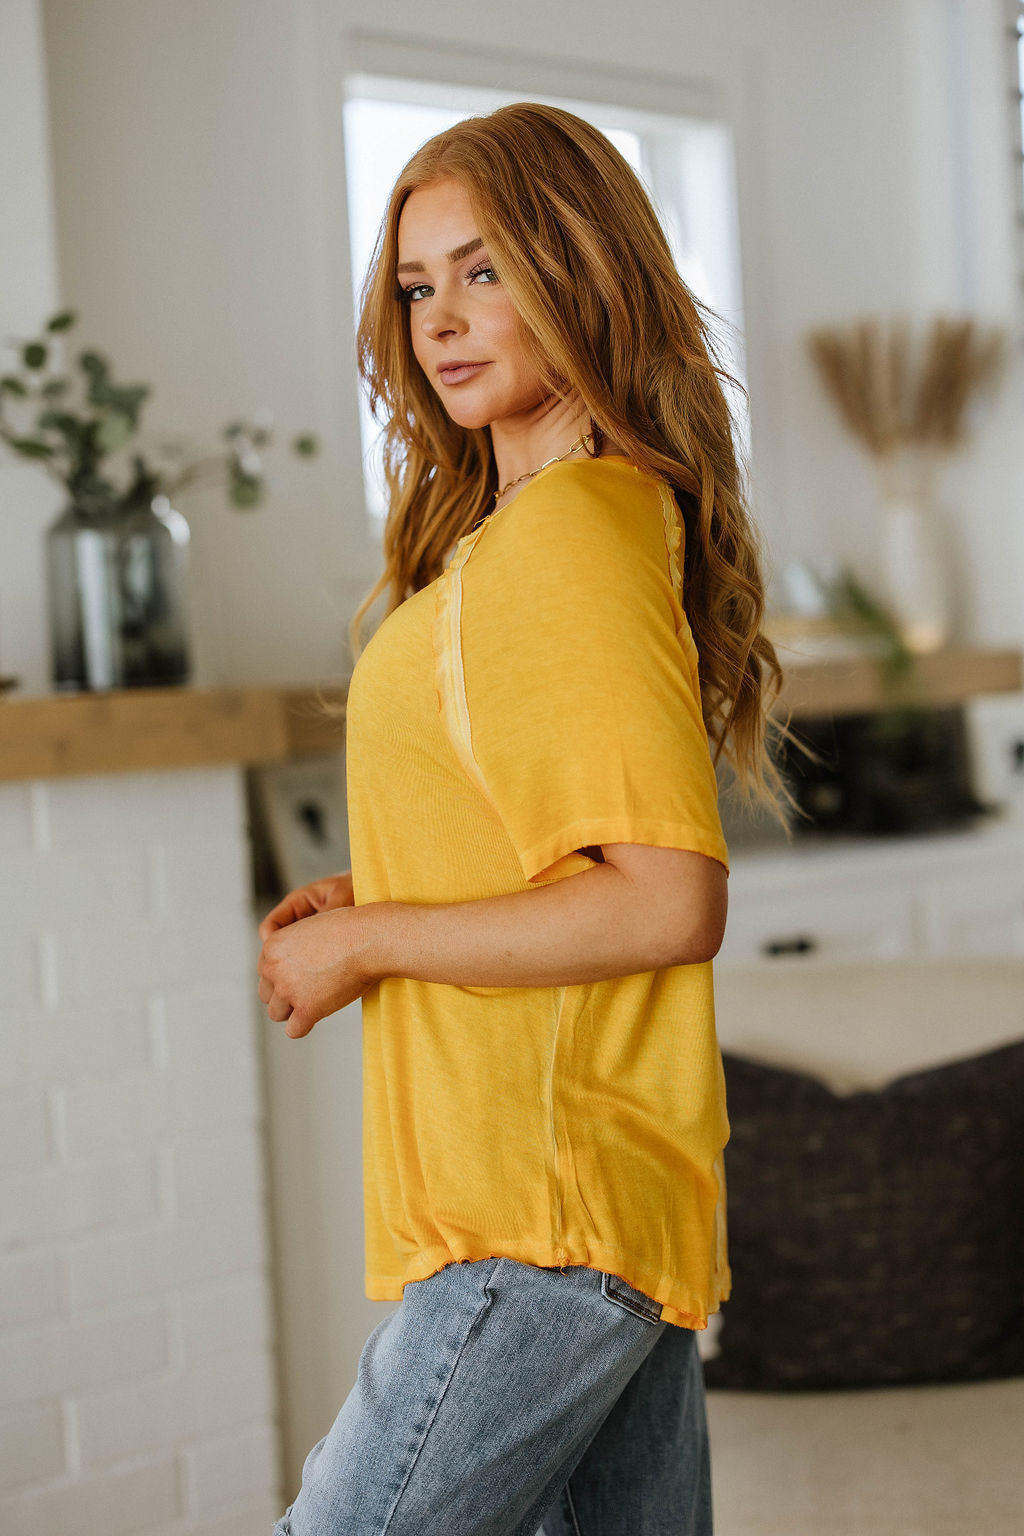 New Edition Mineral Wash T Shirt Yellow-Short Sleeve Tops-Krush Kandy, Women's Online Fashion Boutique Located in Phoenix, Arizona (Scottsdale Area)